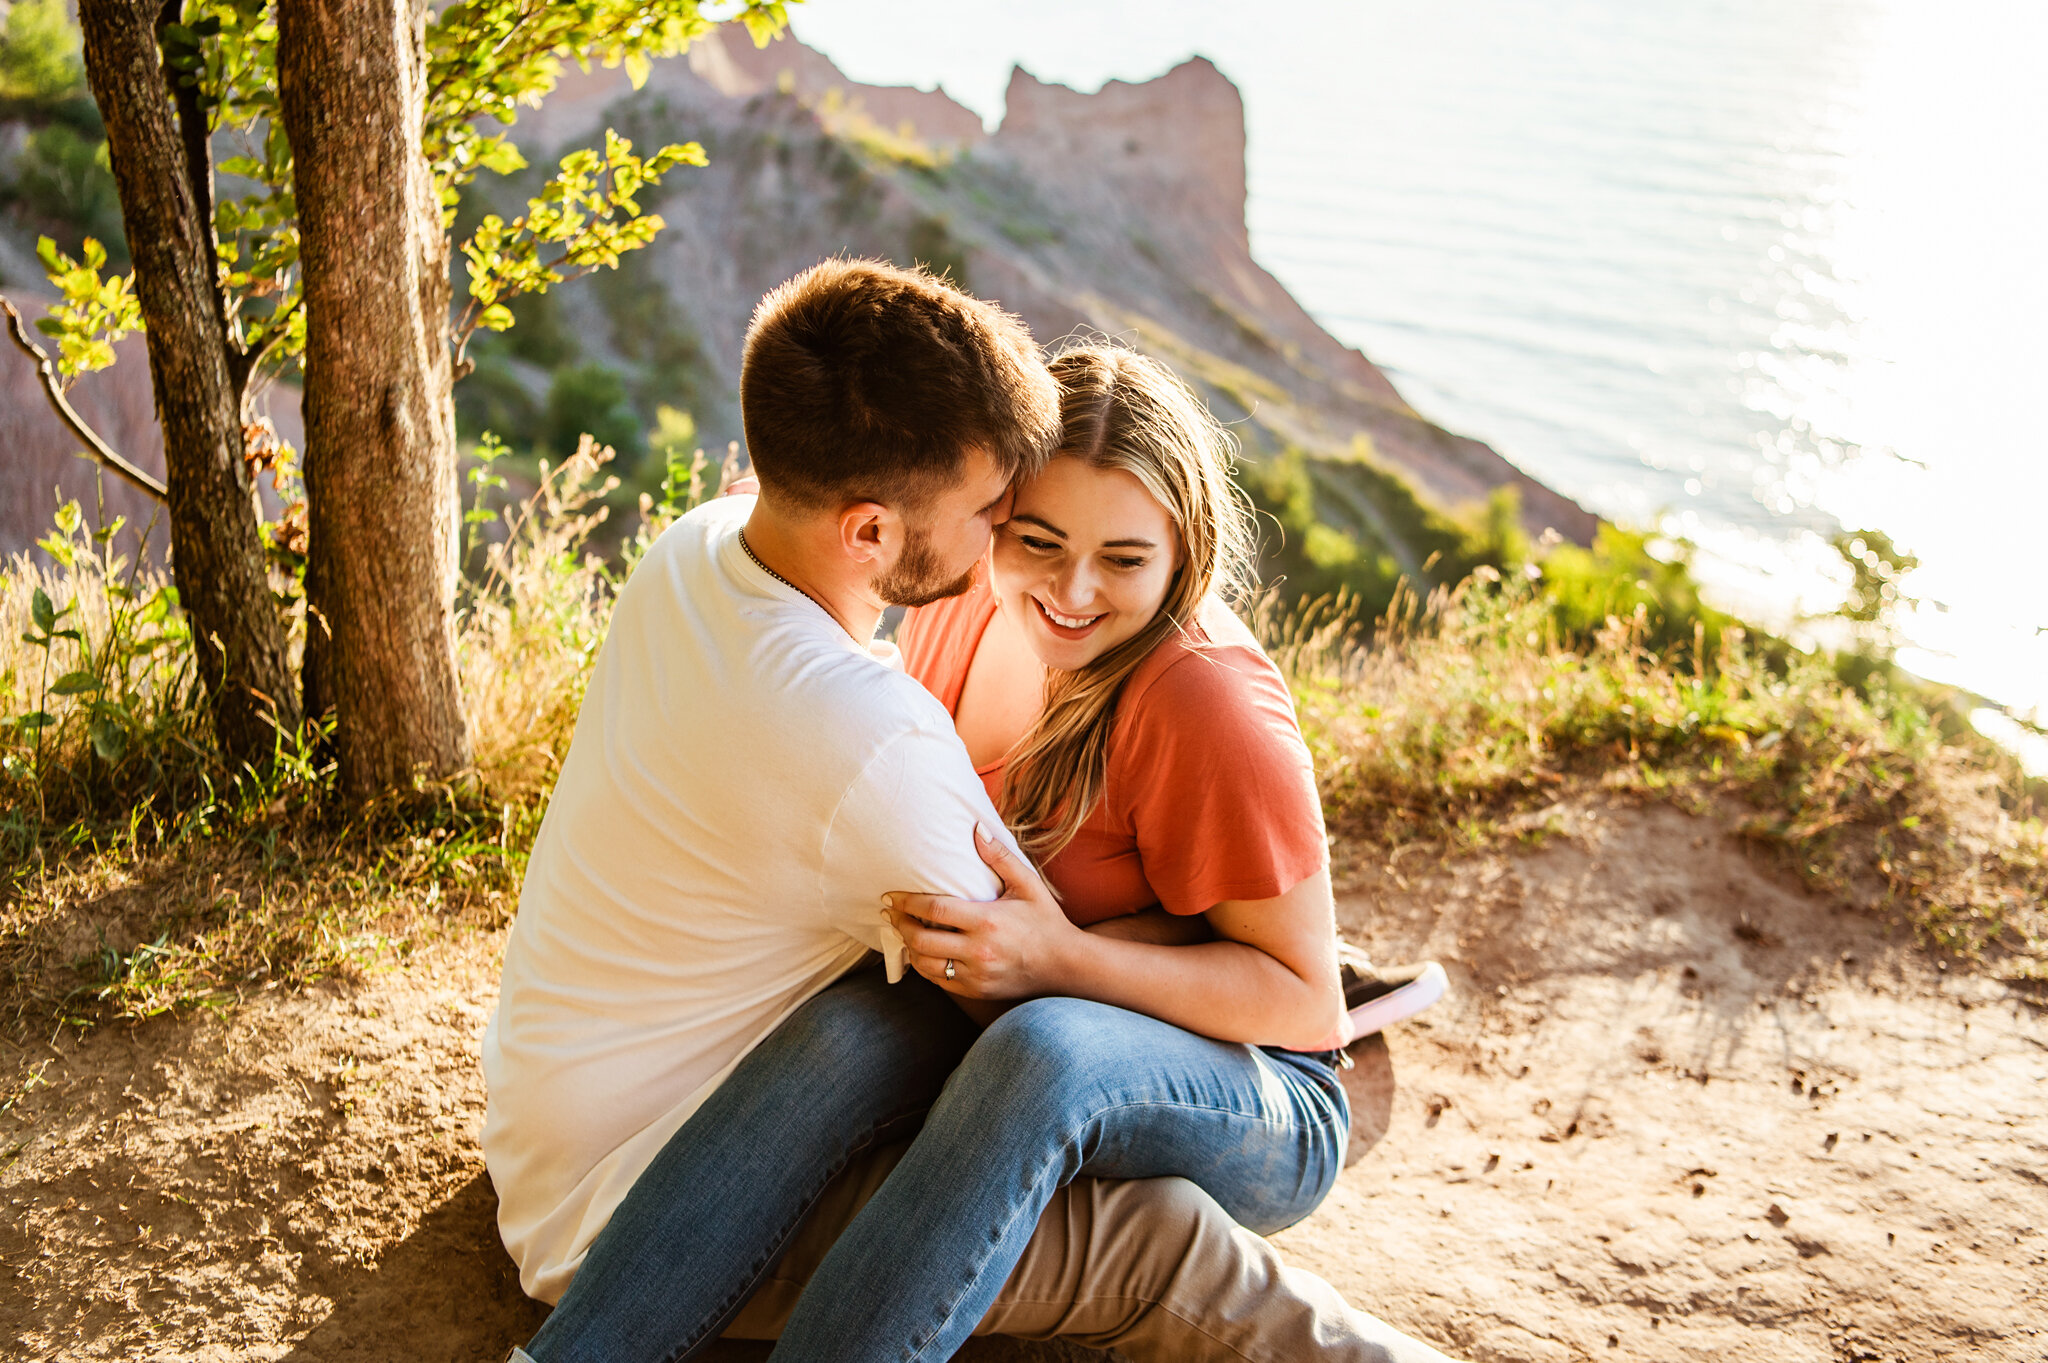 Chimney_Bluffs_State_Park_Rochester_Engagement_Session_JILL_STUDIO_Rochester_NY_Photographer_6839.jpg